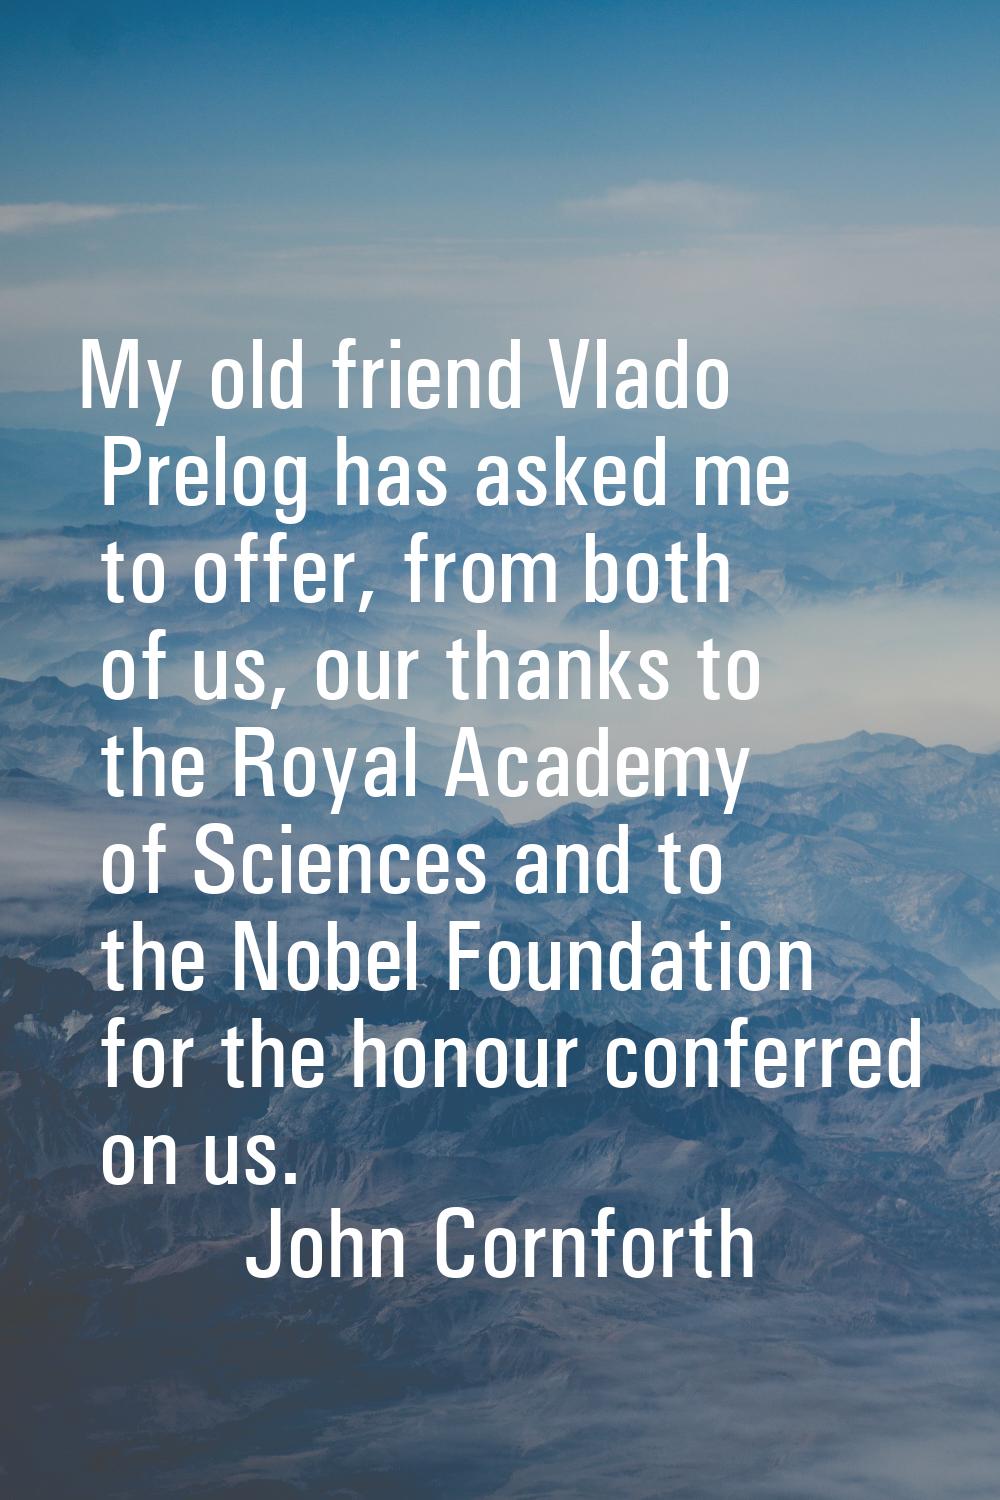 My old friend Vlado Prelog has asked me to offer, from both of us, our thanks to the Royal Academy 